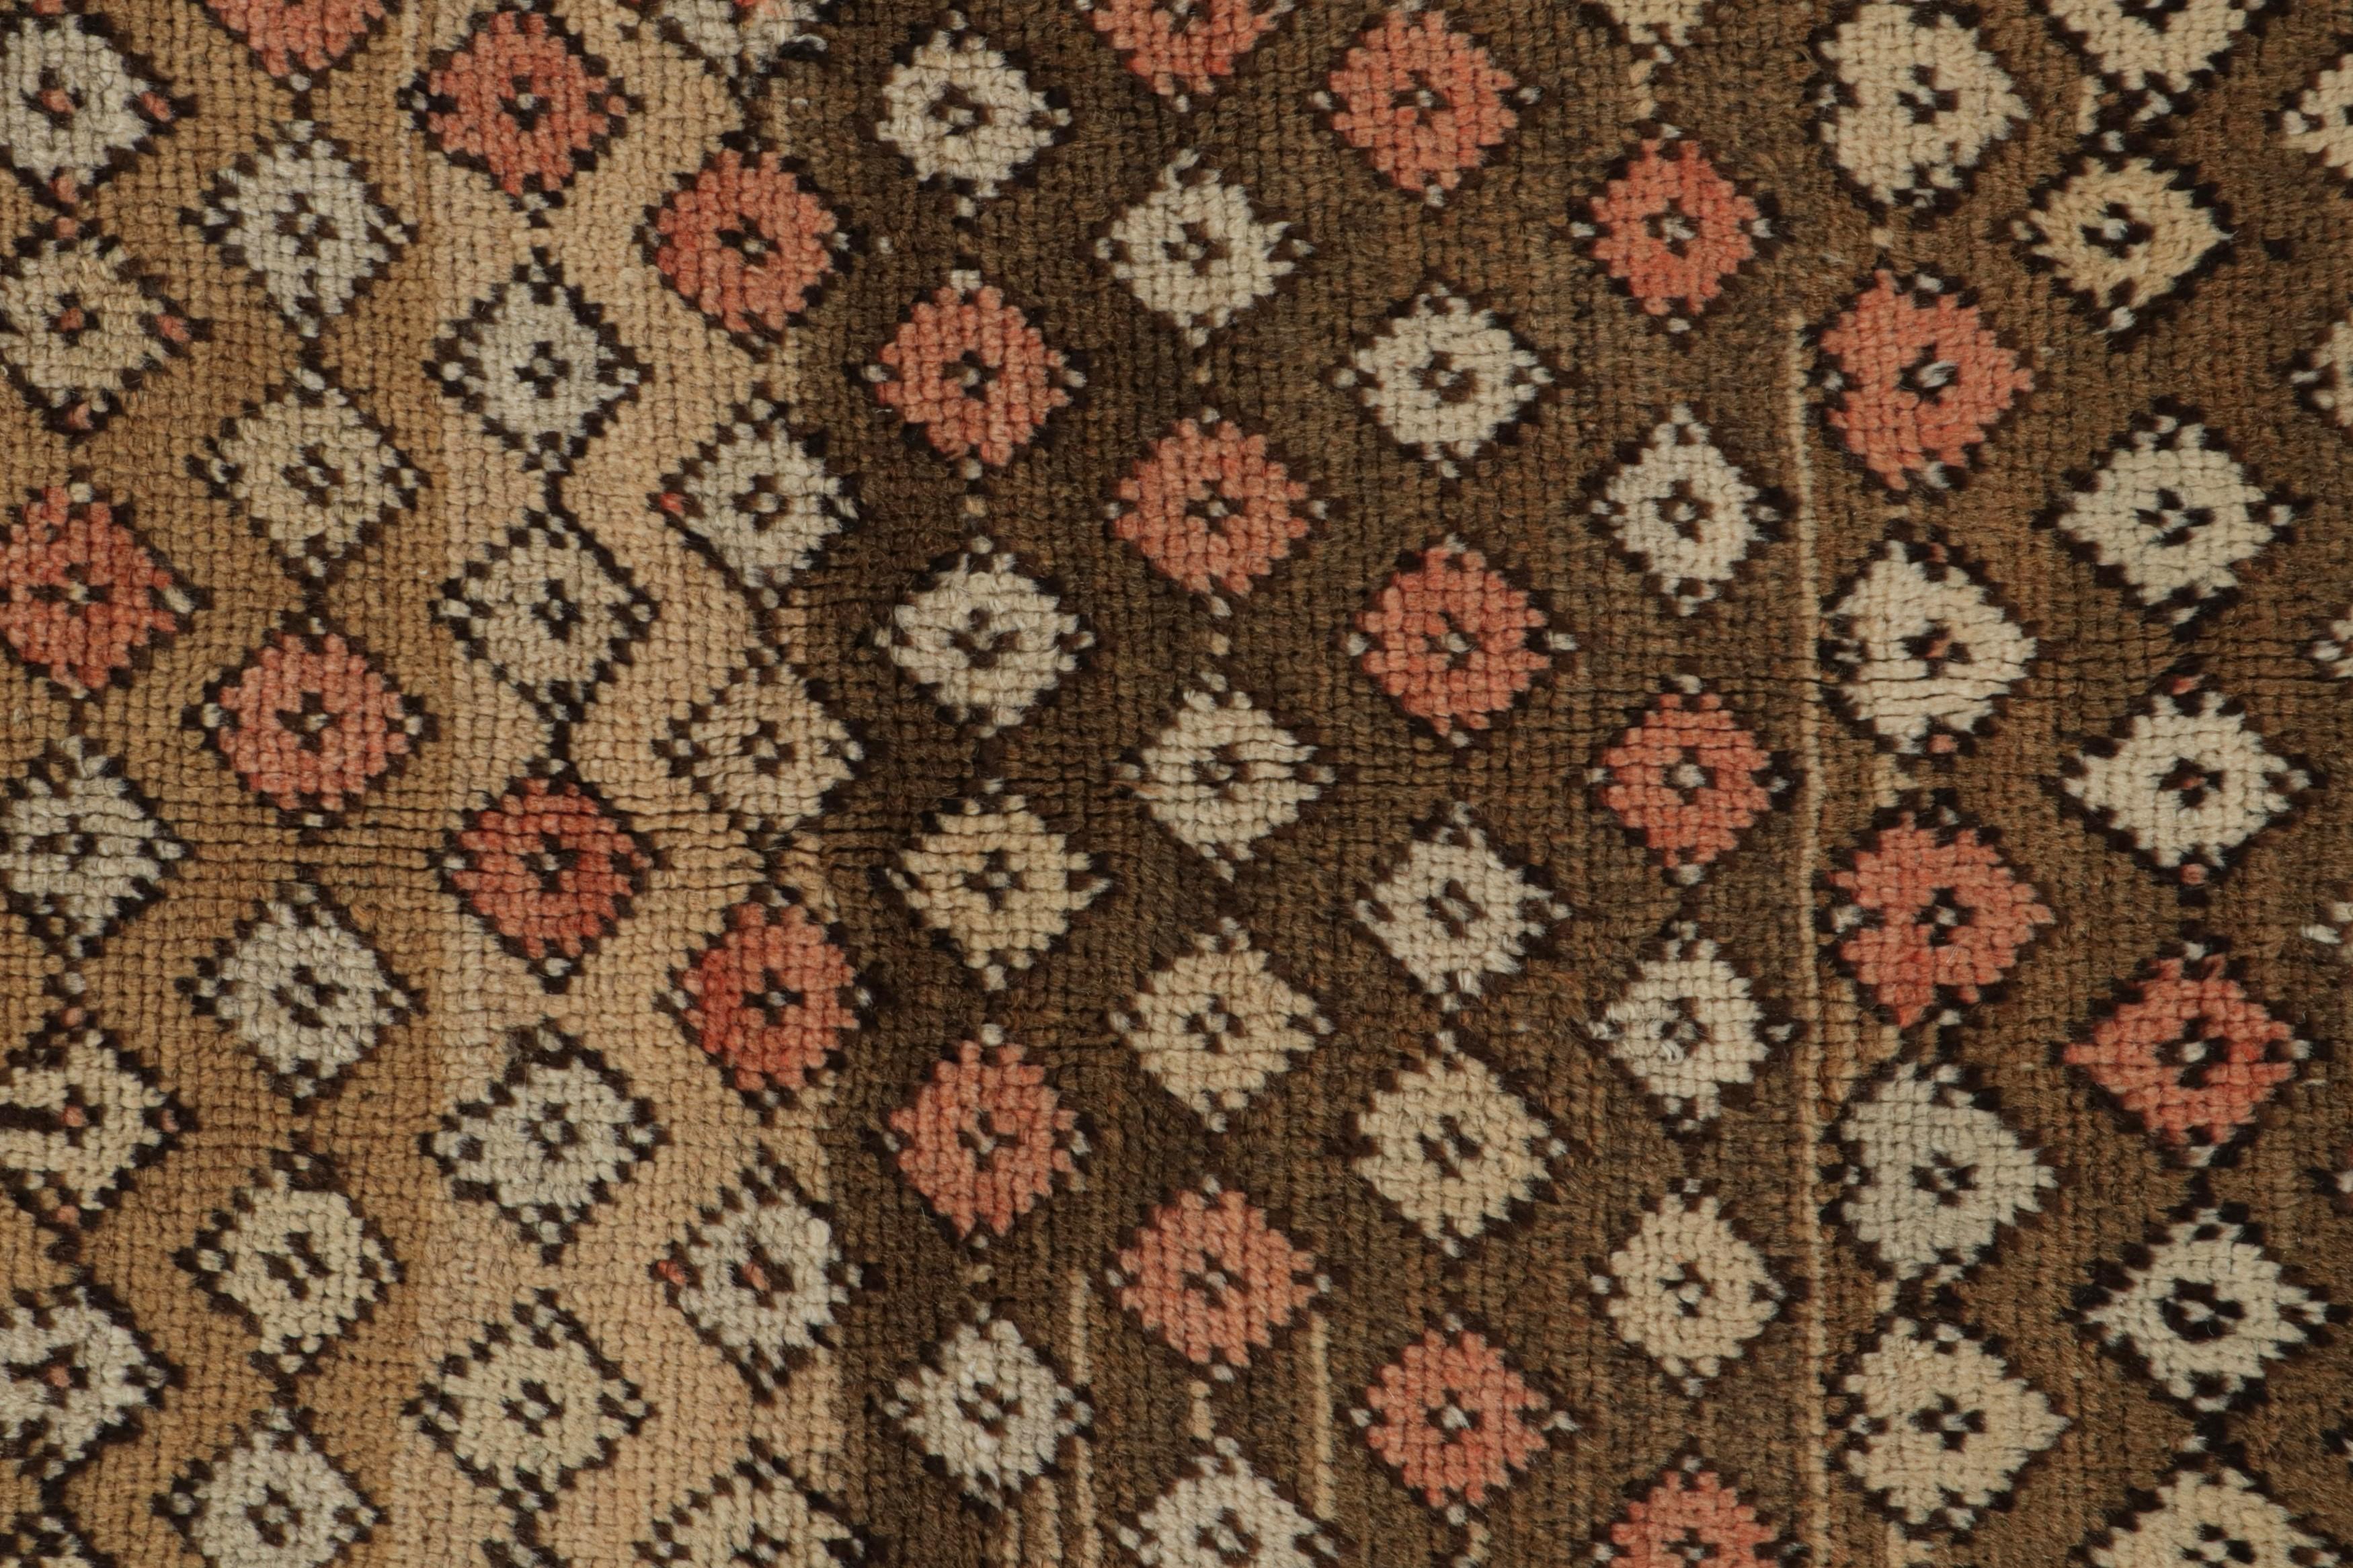 Late 19th Century Antique Oushak rug in Beige-Brown Tribal Patterns by Rug & Kilim For Sale